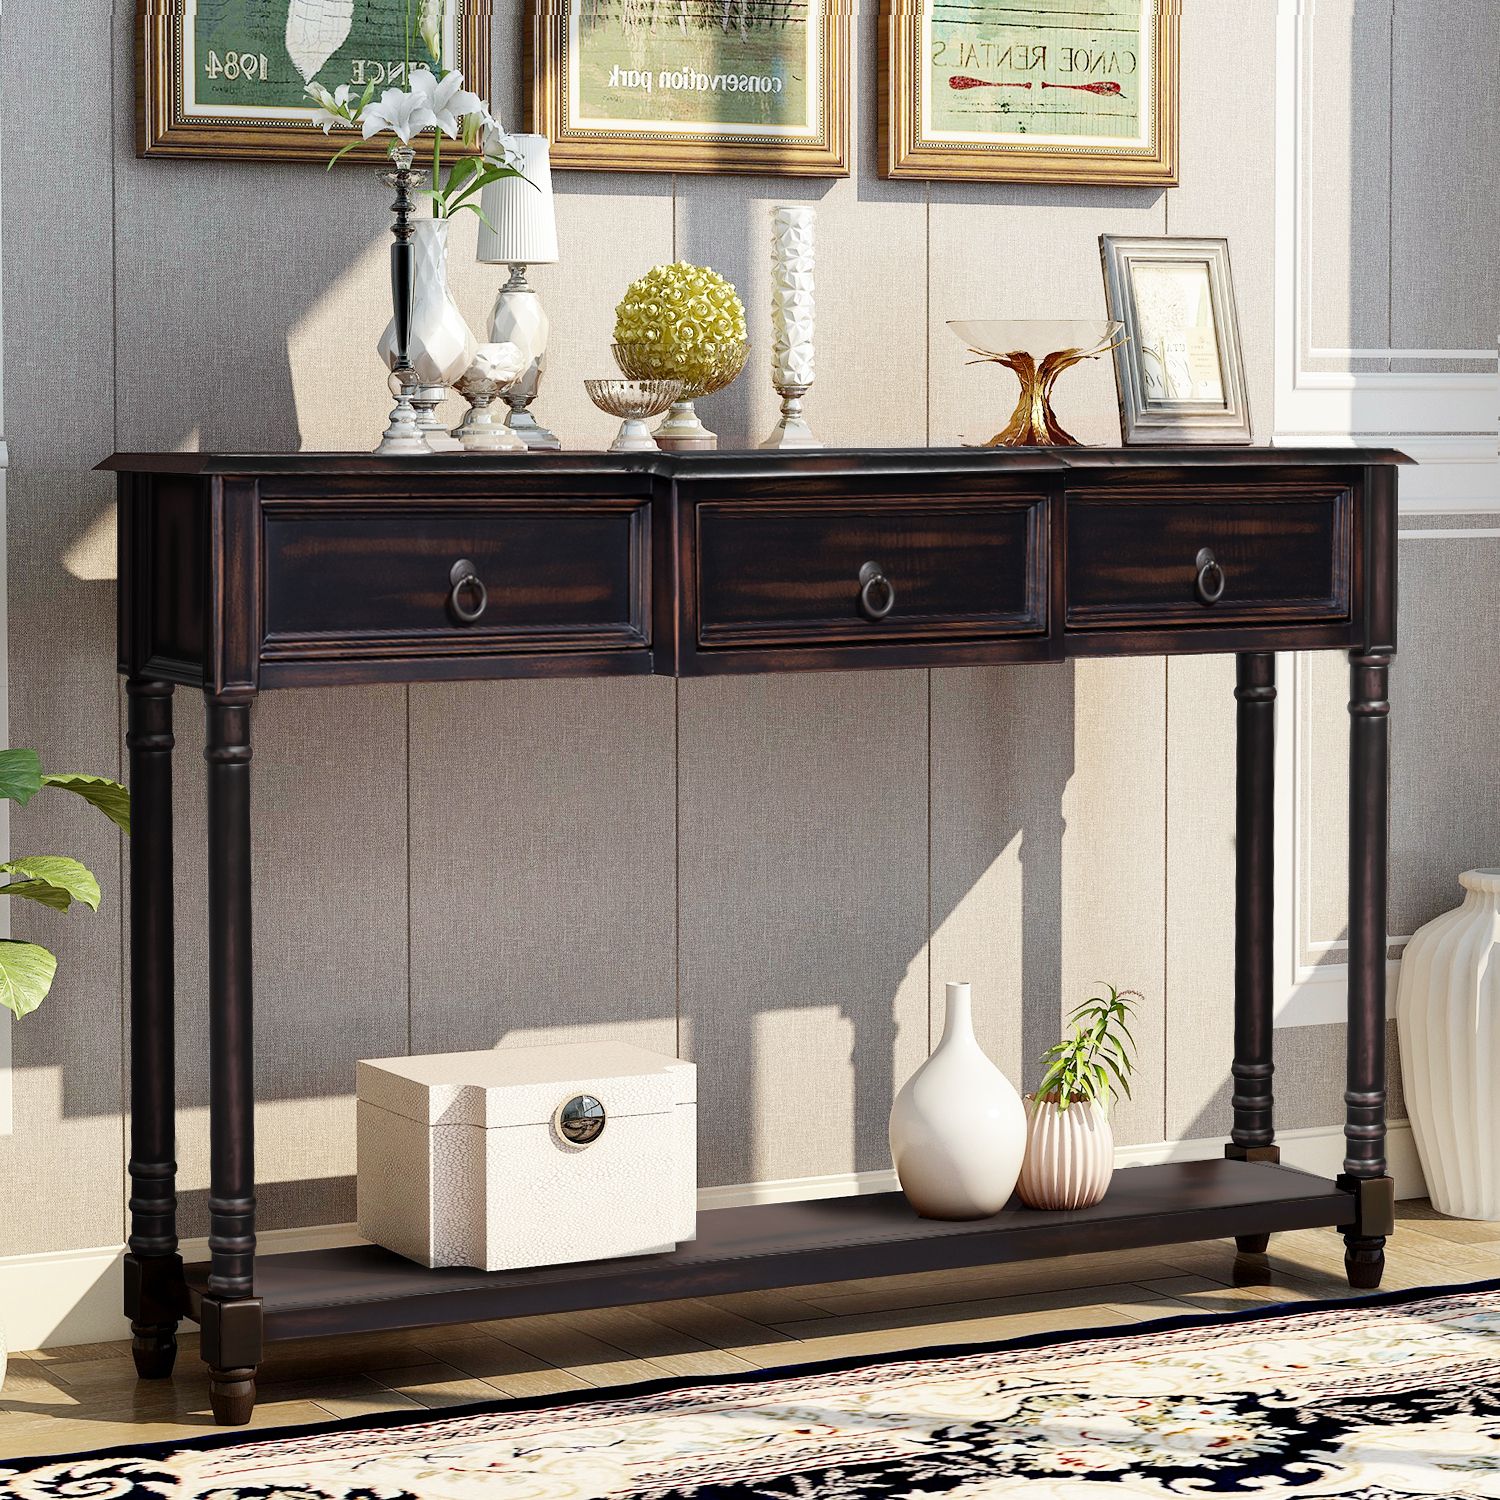 Black Wood Storage Console Tables In Most Popular Console Table Buffet Cabinet Sideboard Sofa Table With  (View 1 of 10)